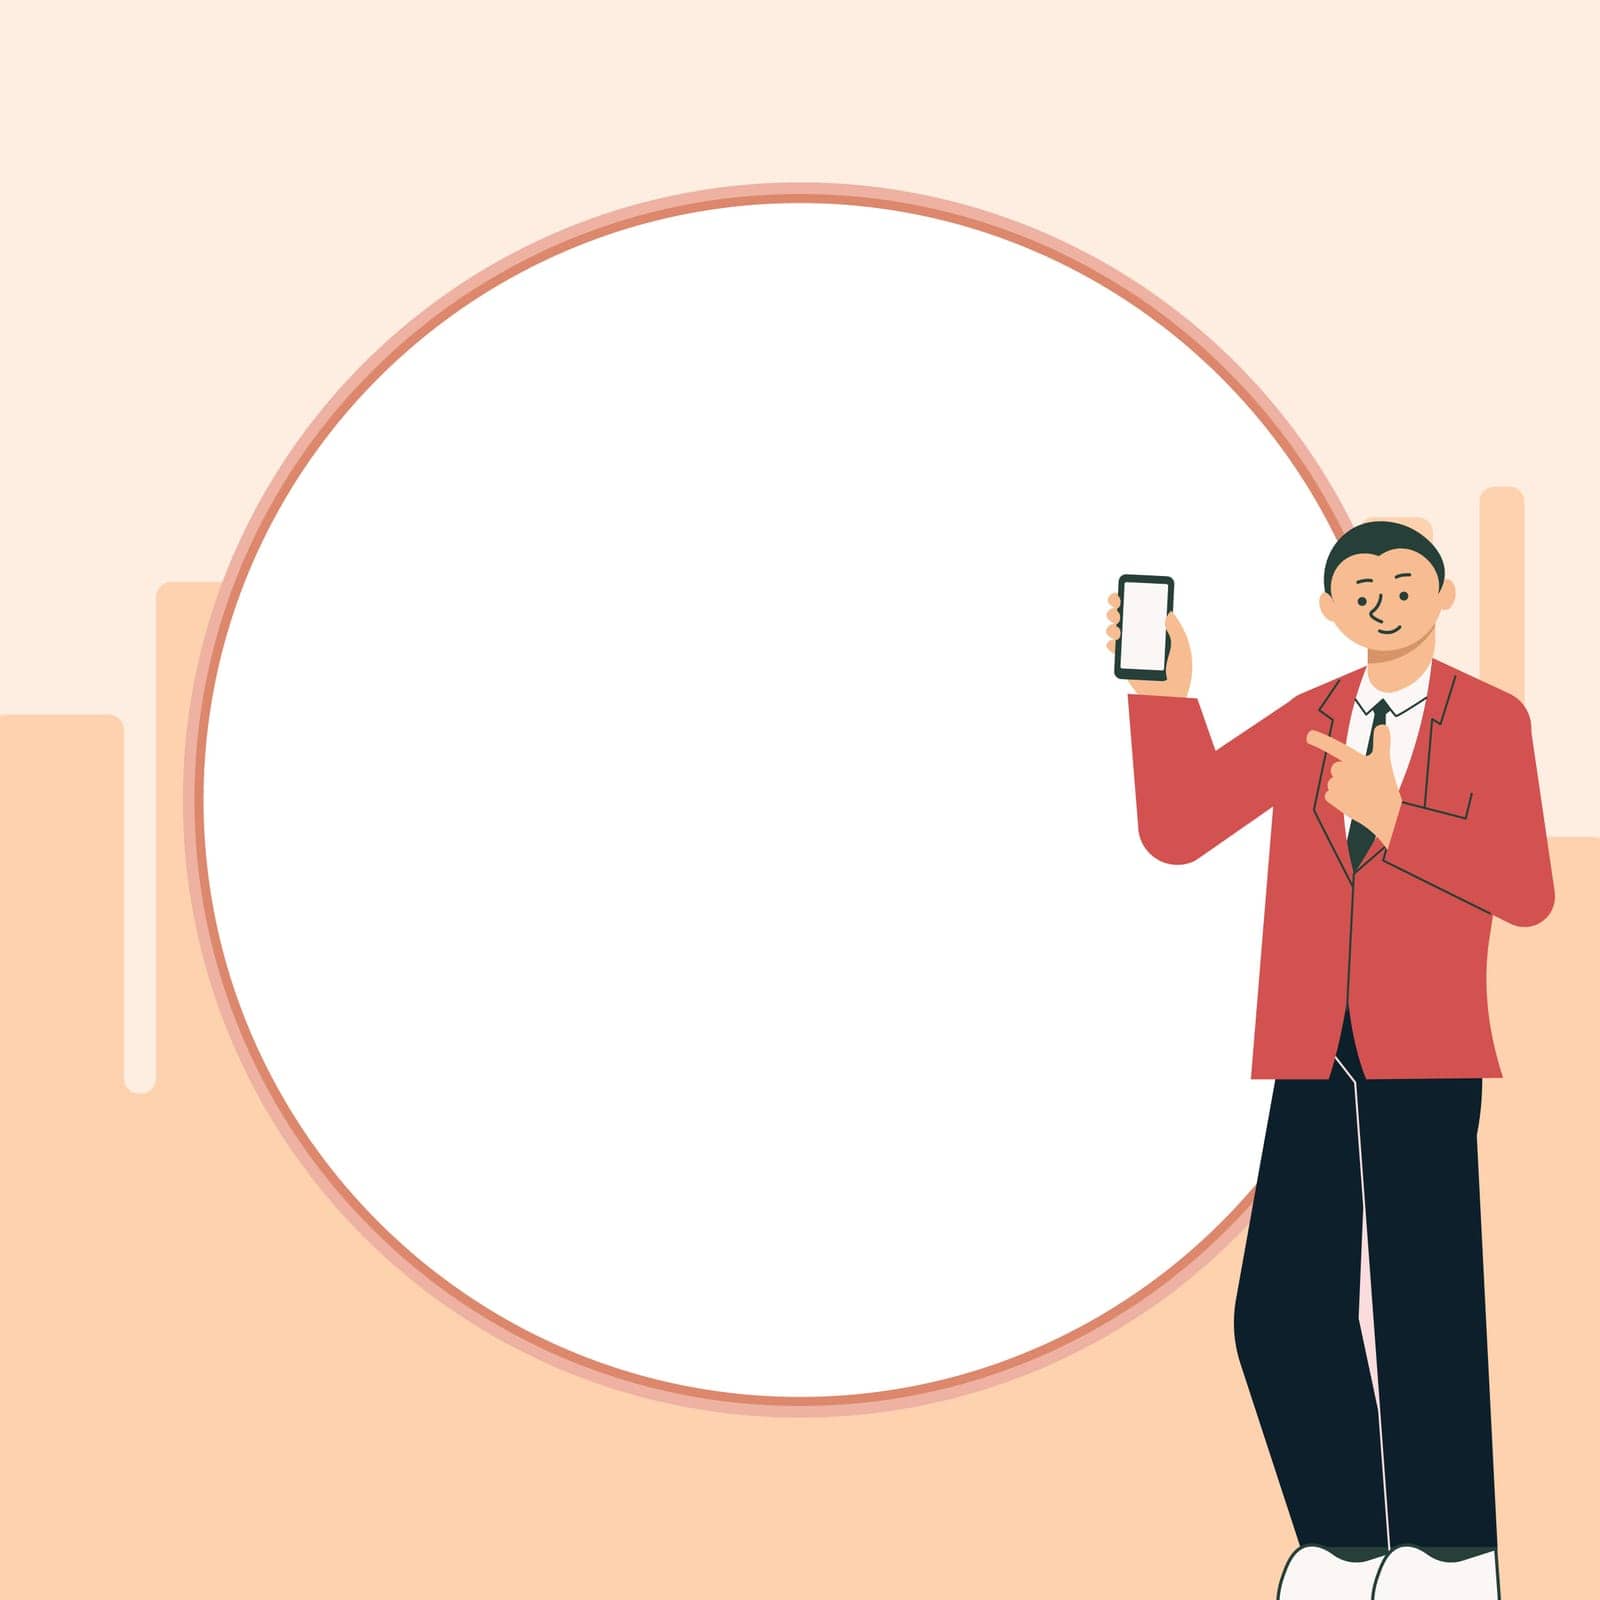 Businessman holding cellphone. Big speech bubble on colored background.